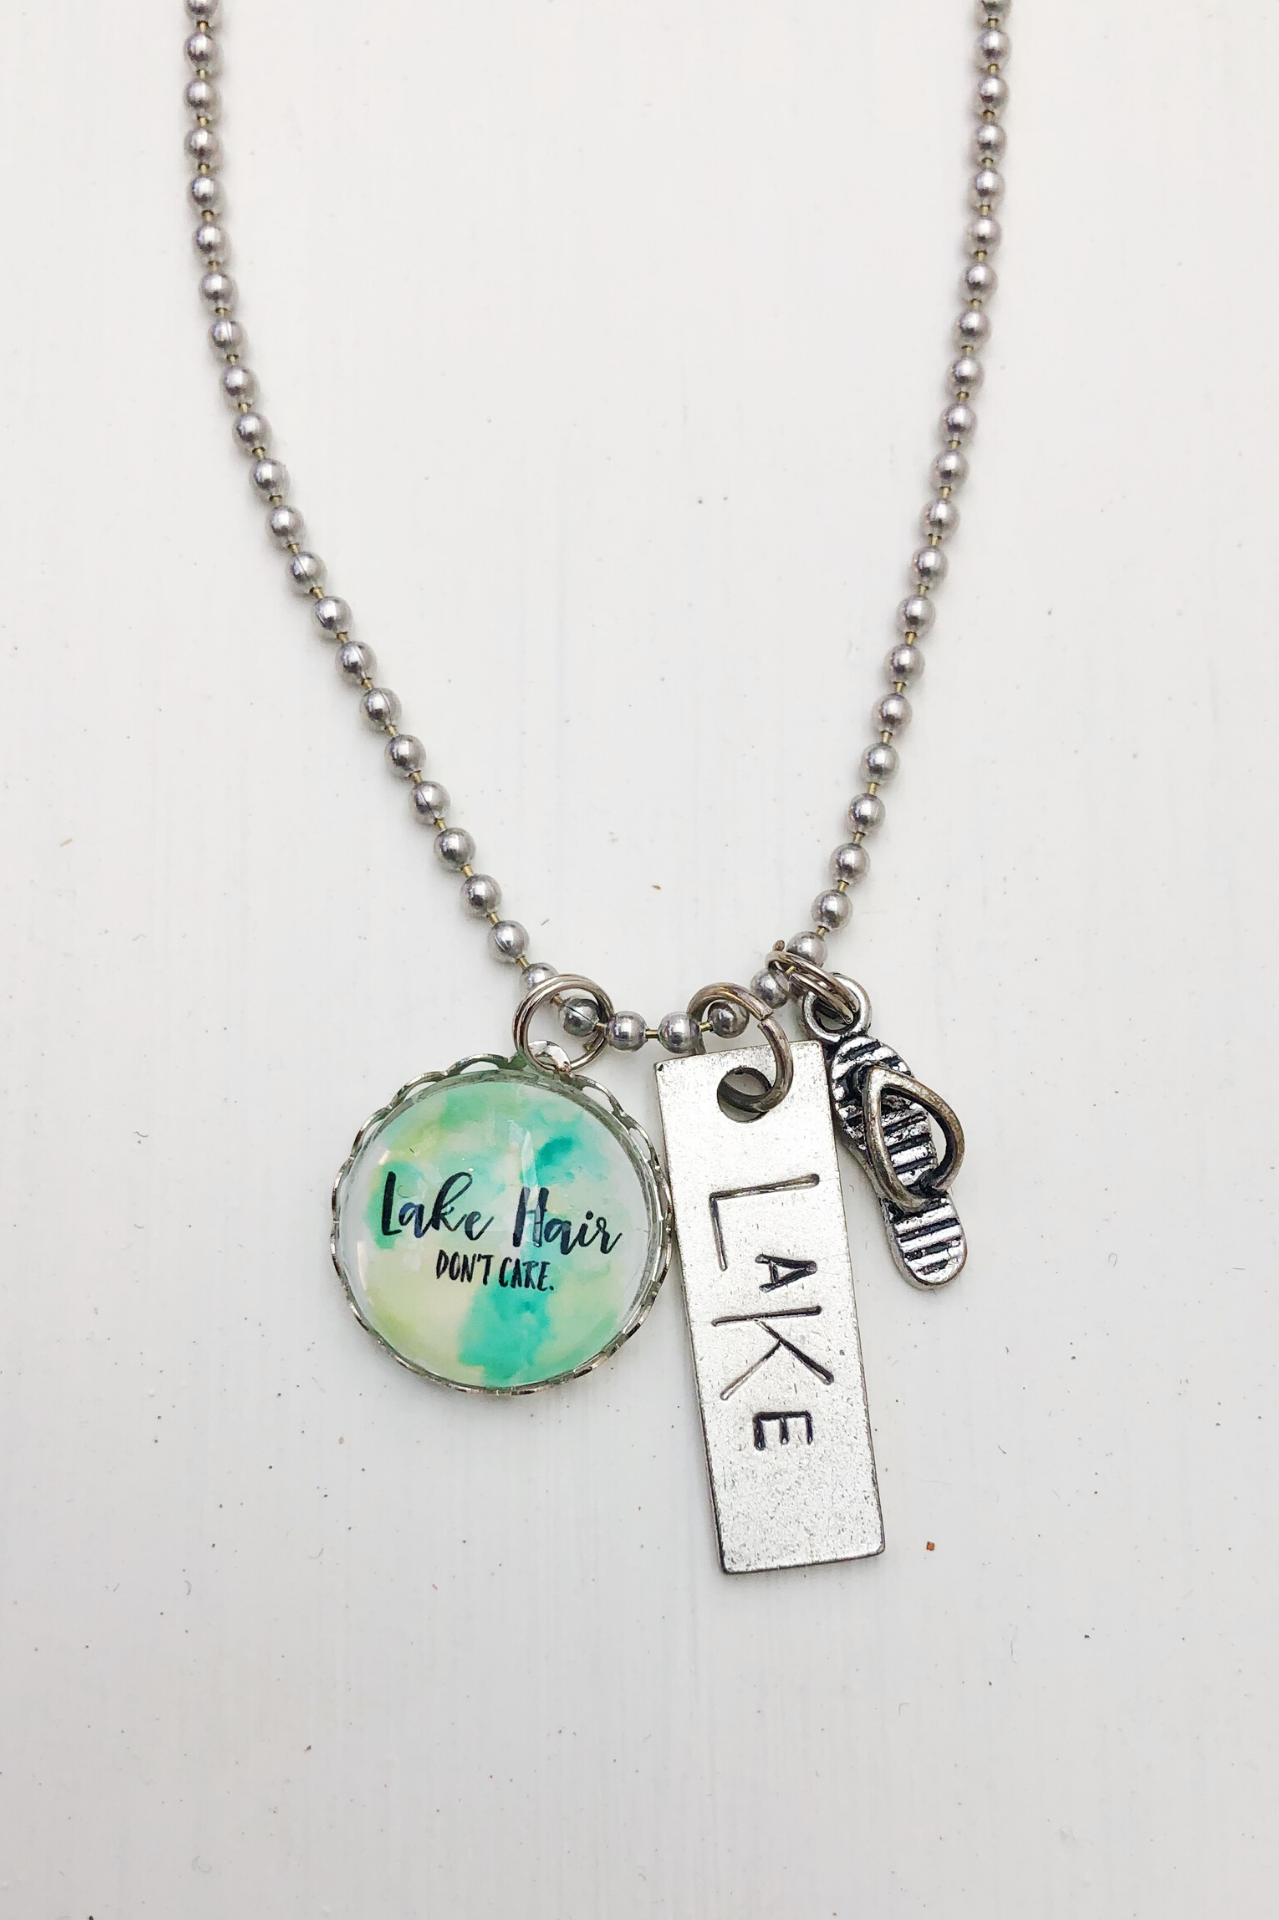 Lake Hair Don't Care Necklace